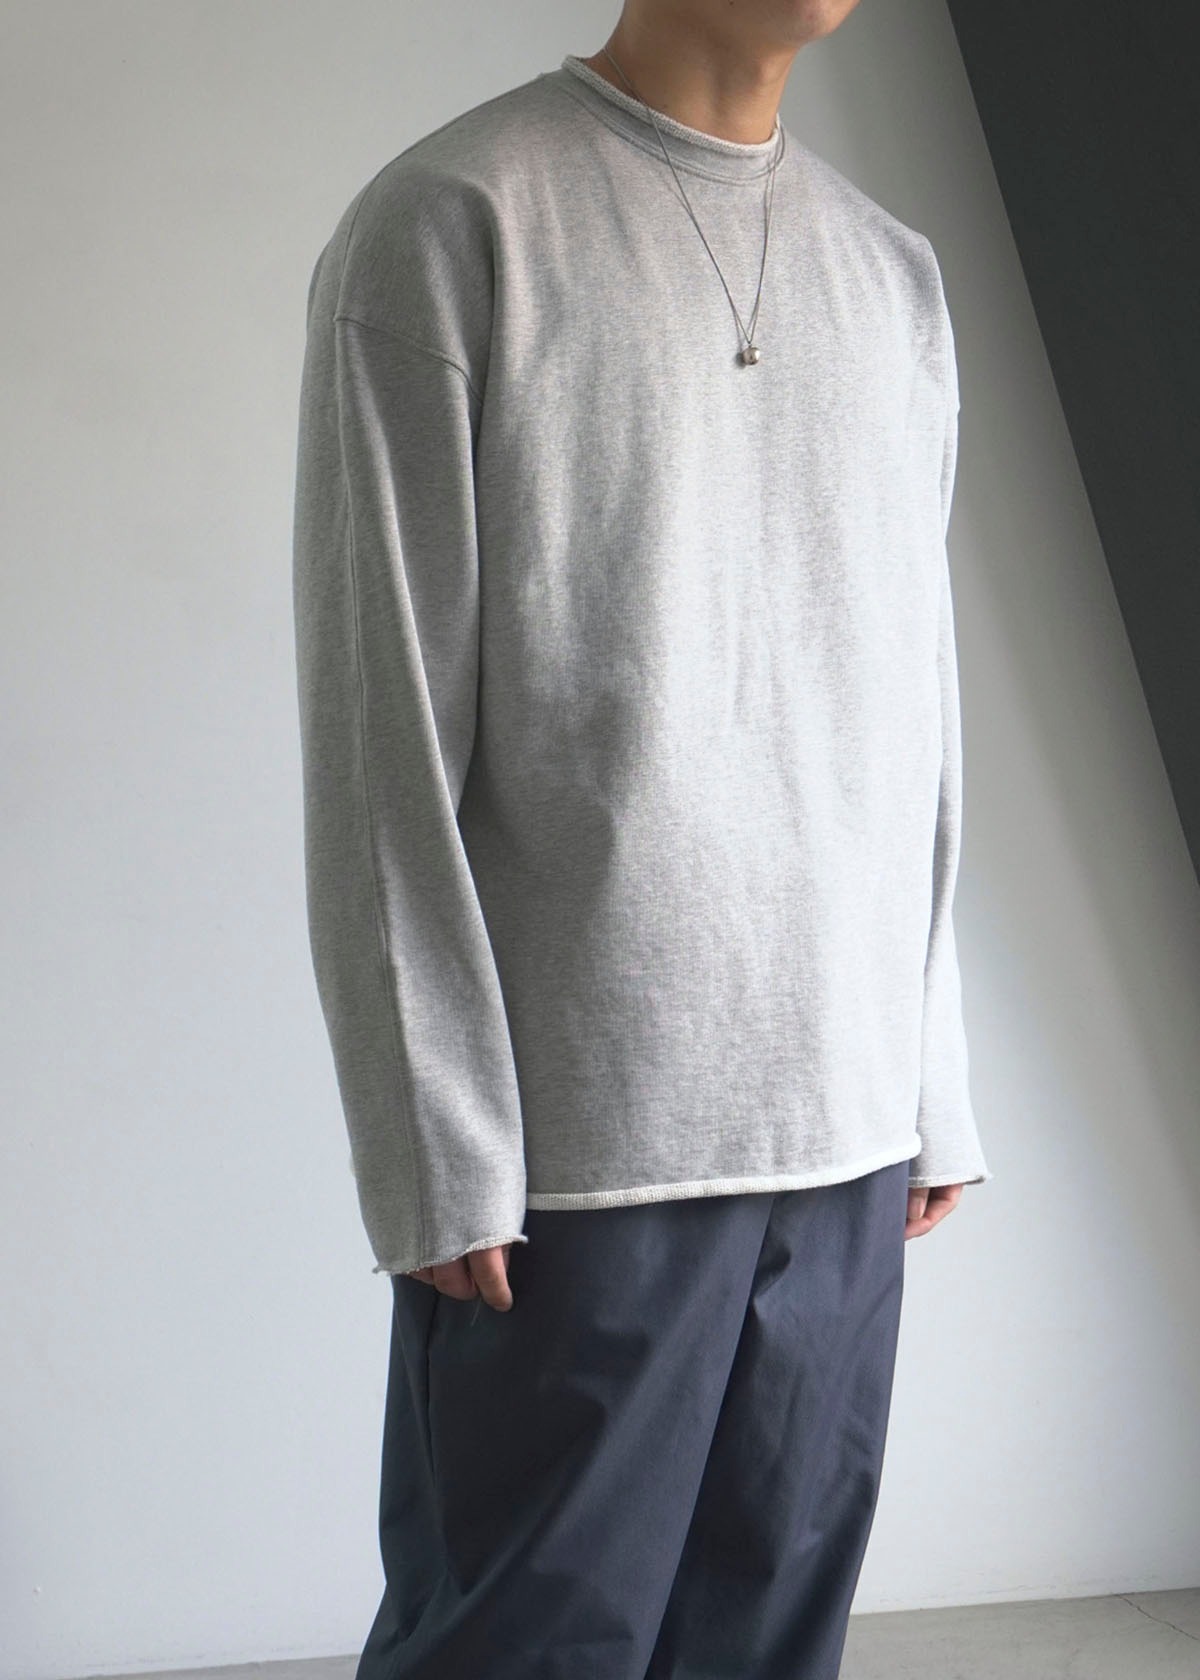 Loose Cutting All Day Sweatshirts (3Color)